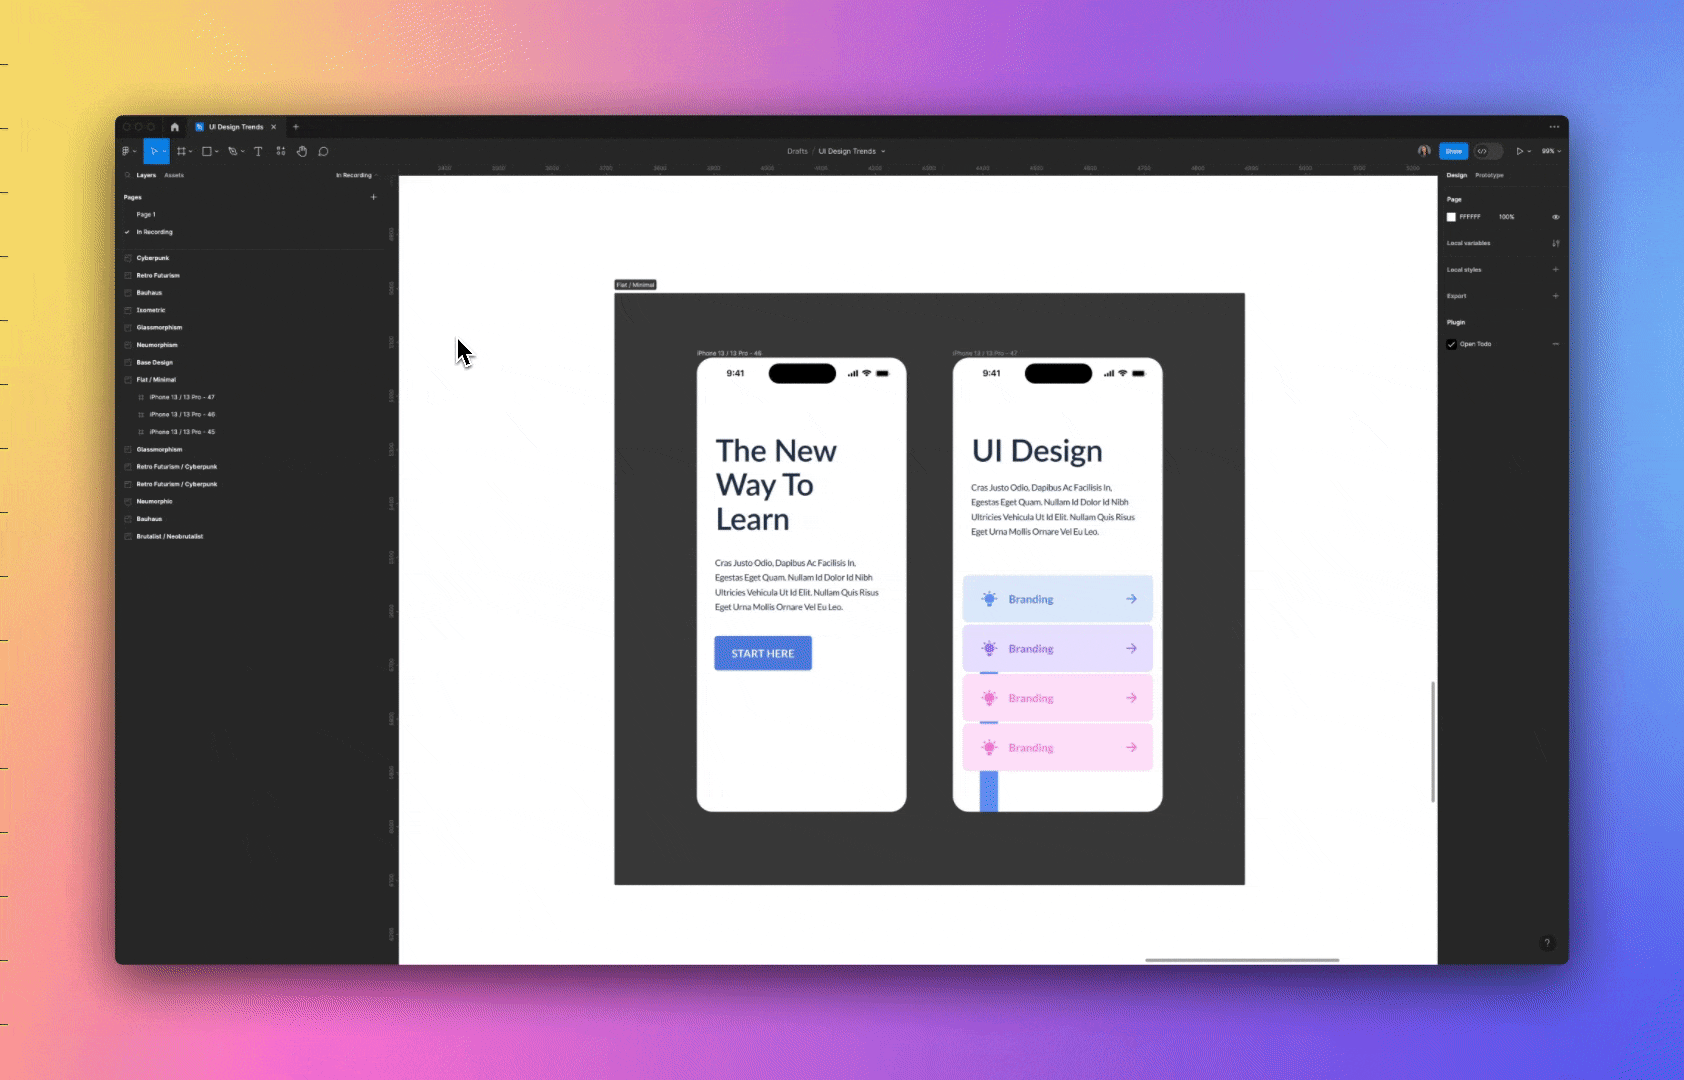 How To Add a Simple To-Do List or Checklist For Your Project Inside of Figma